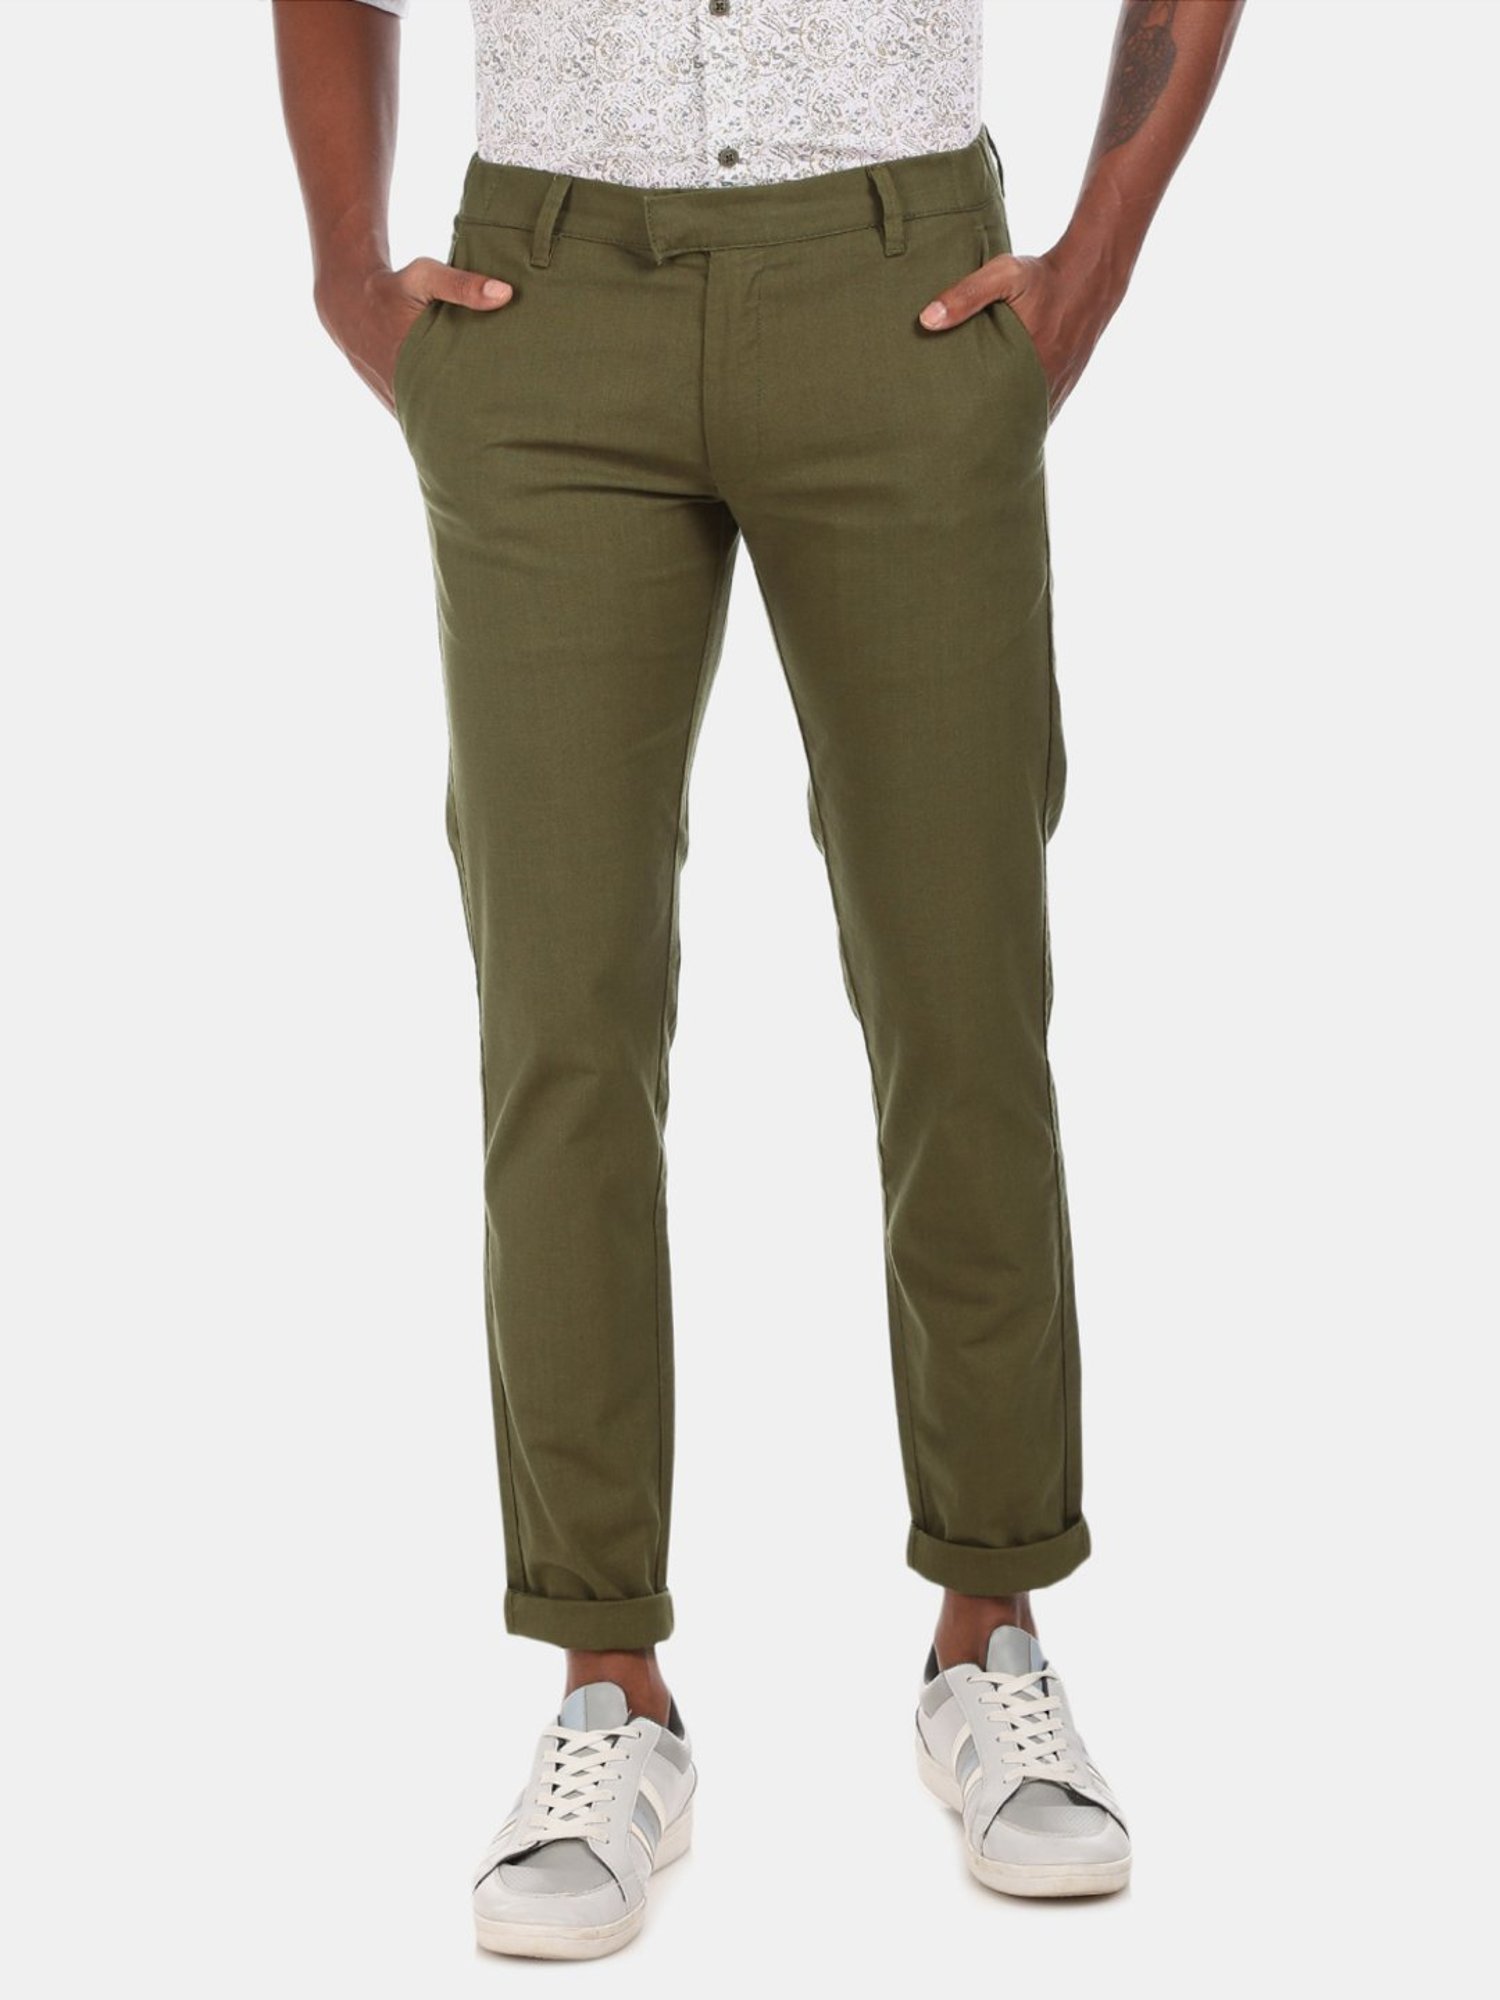 Ruggers Casual Trousers  Buy Ruggers Urban Slim Fit Solid Trousers Online   Nykaa Fashion